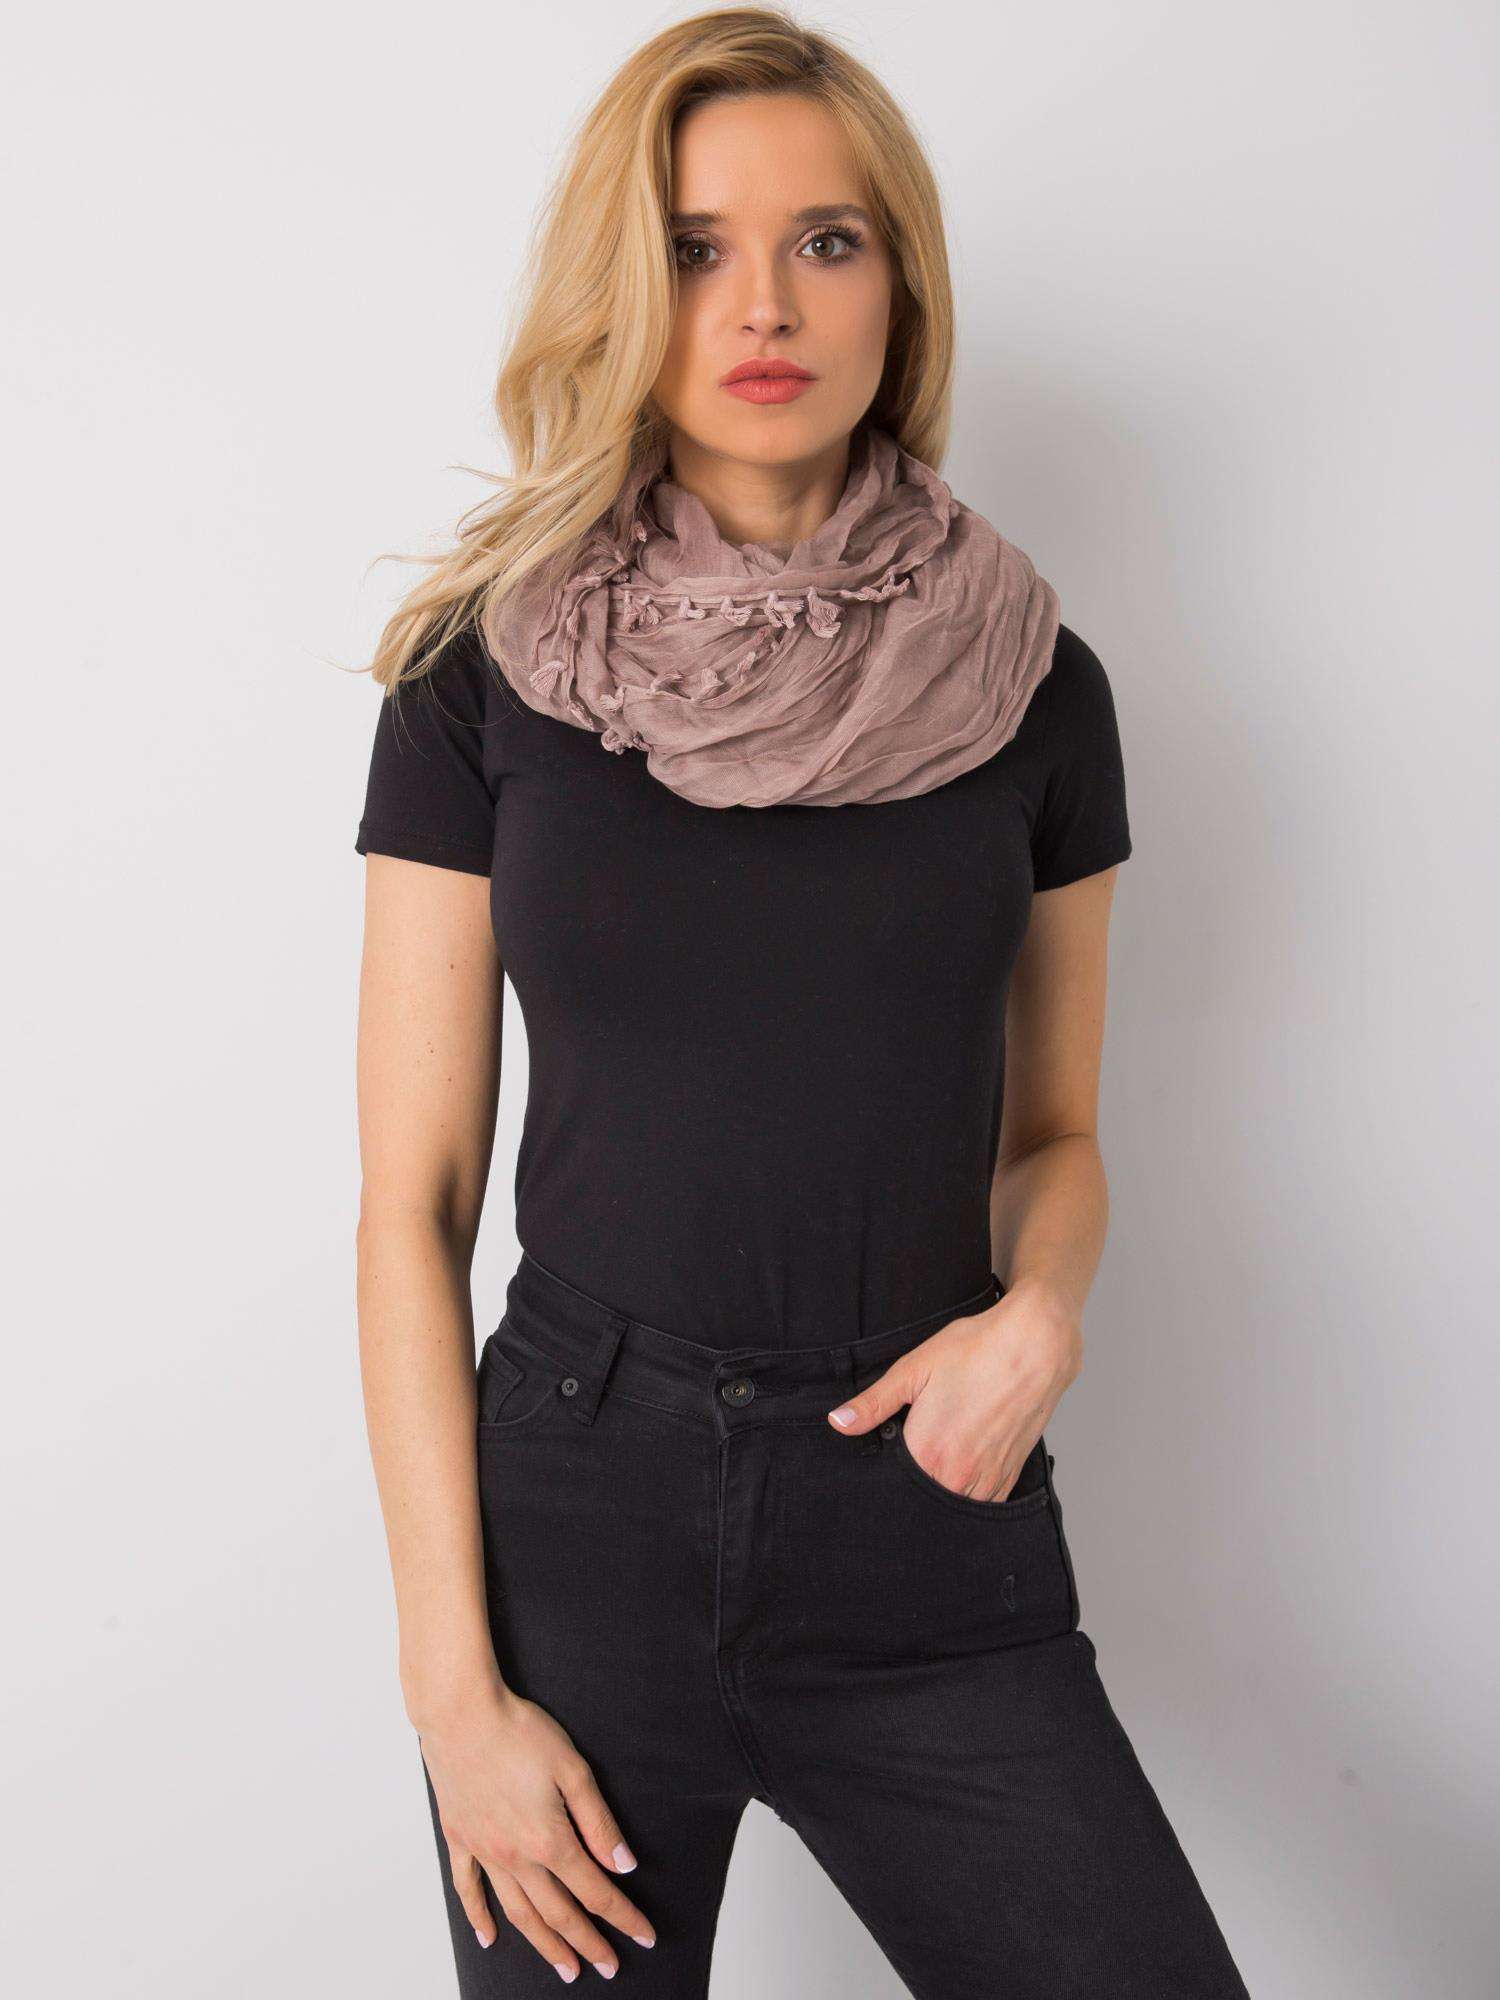 Women's brown scarf with fringe